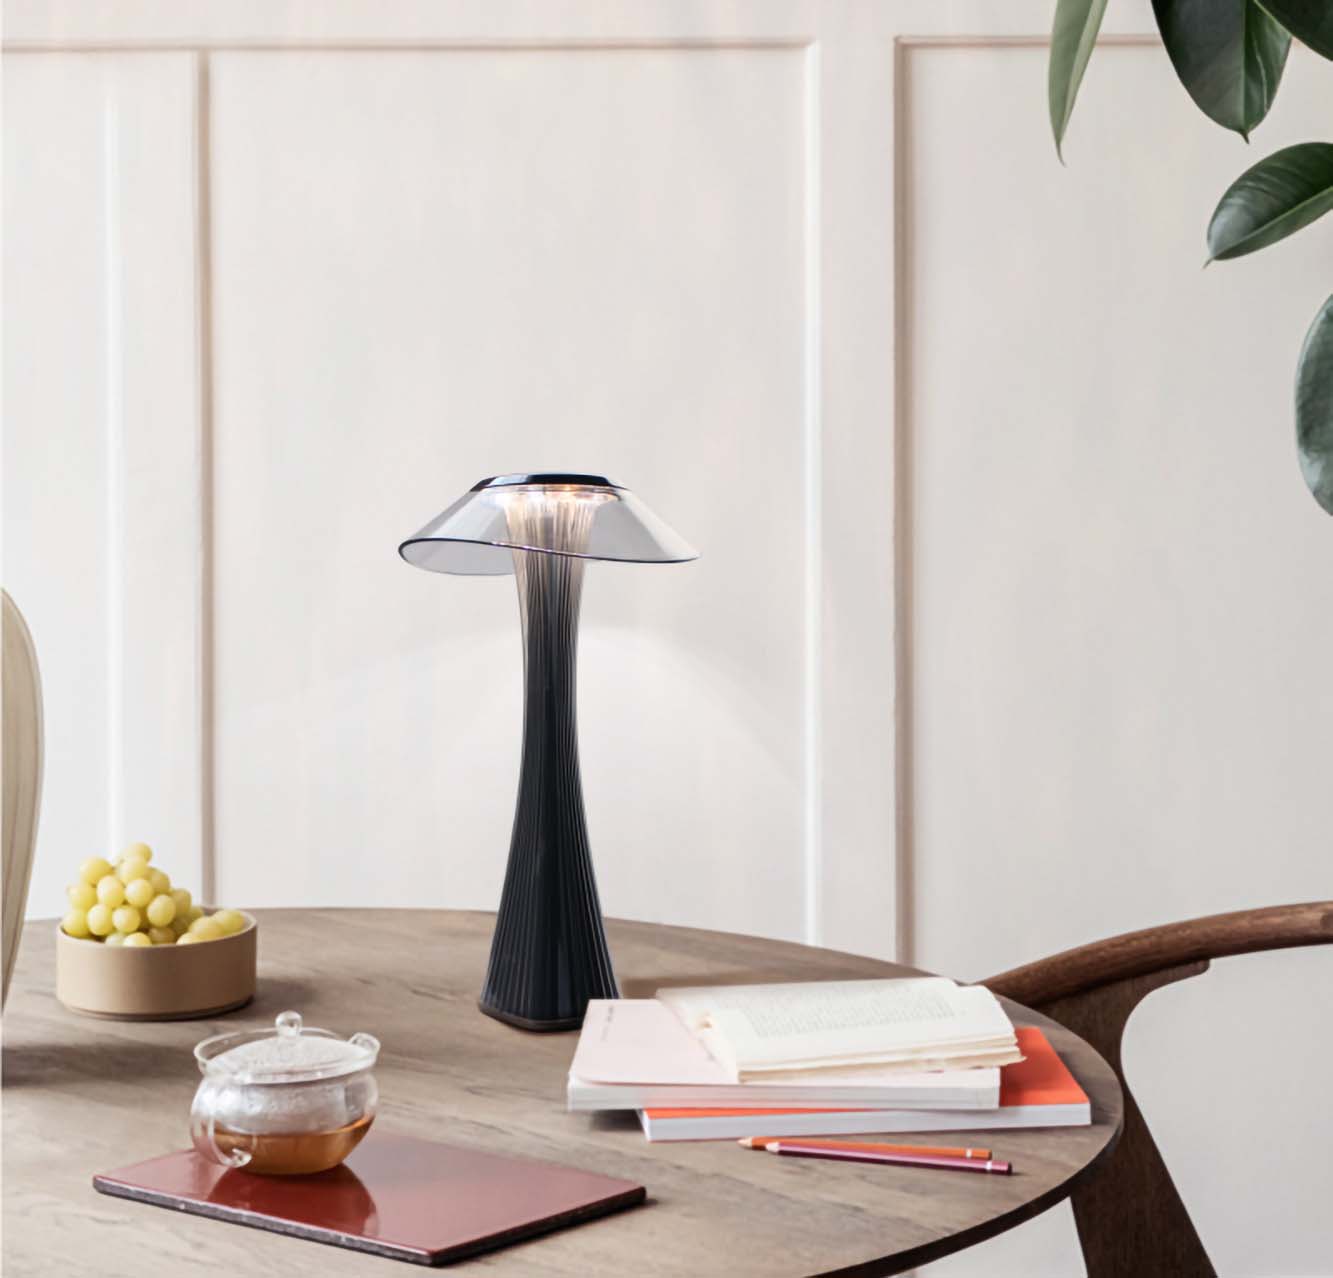 SPACE PORTABLE TABLE LIGHT BY ADAM TIHANY